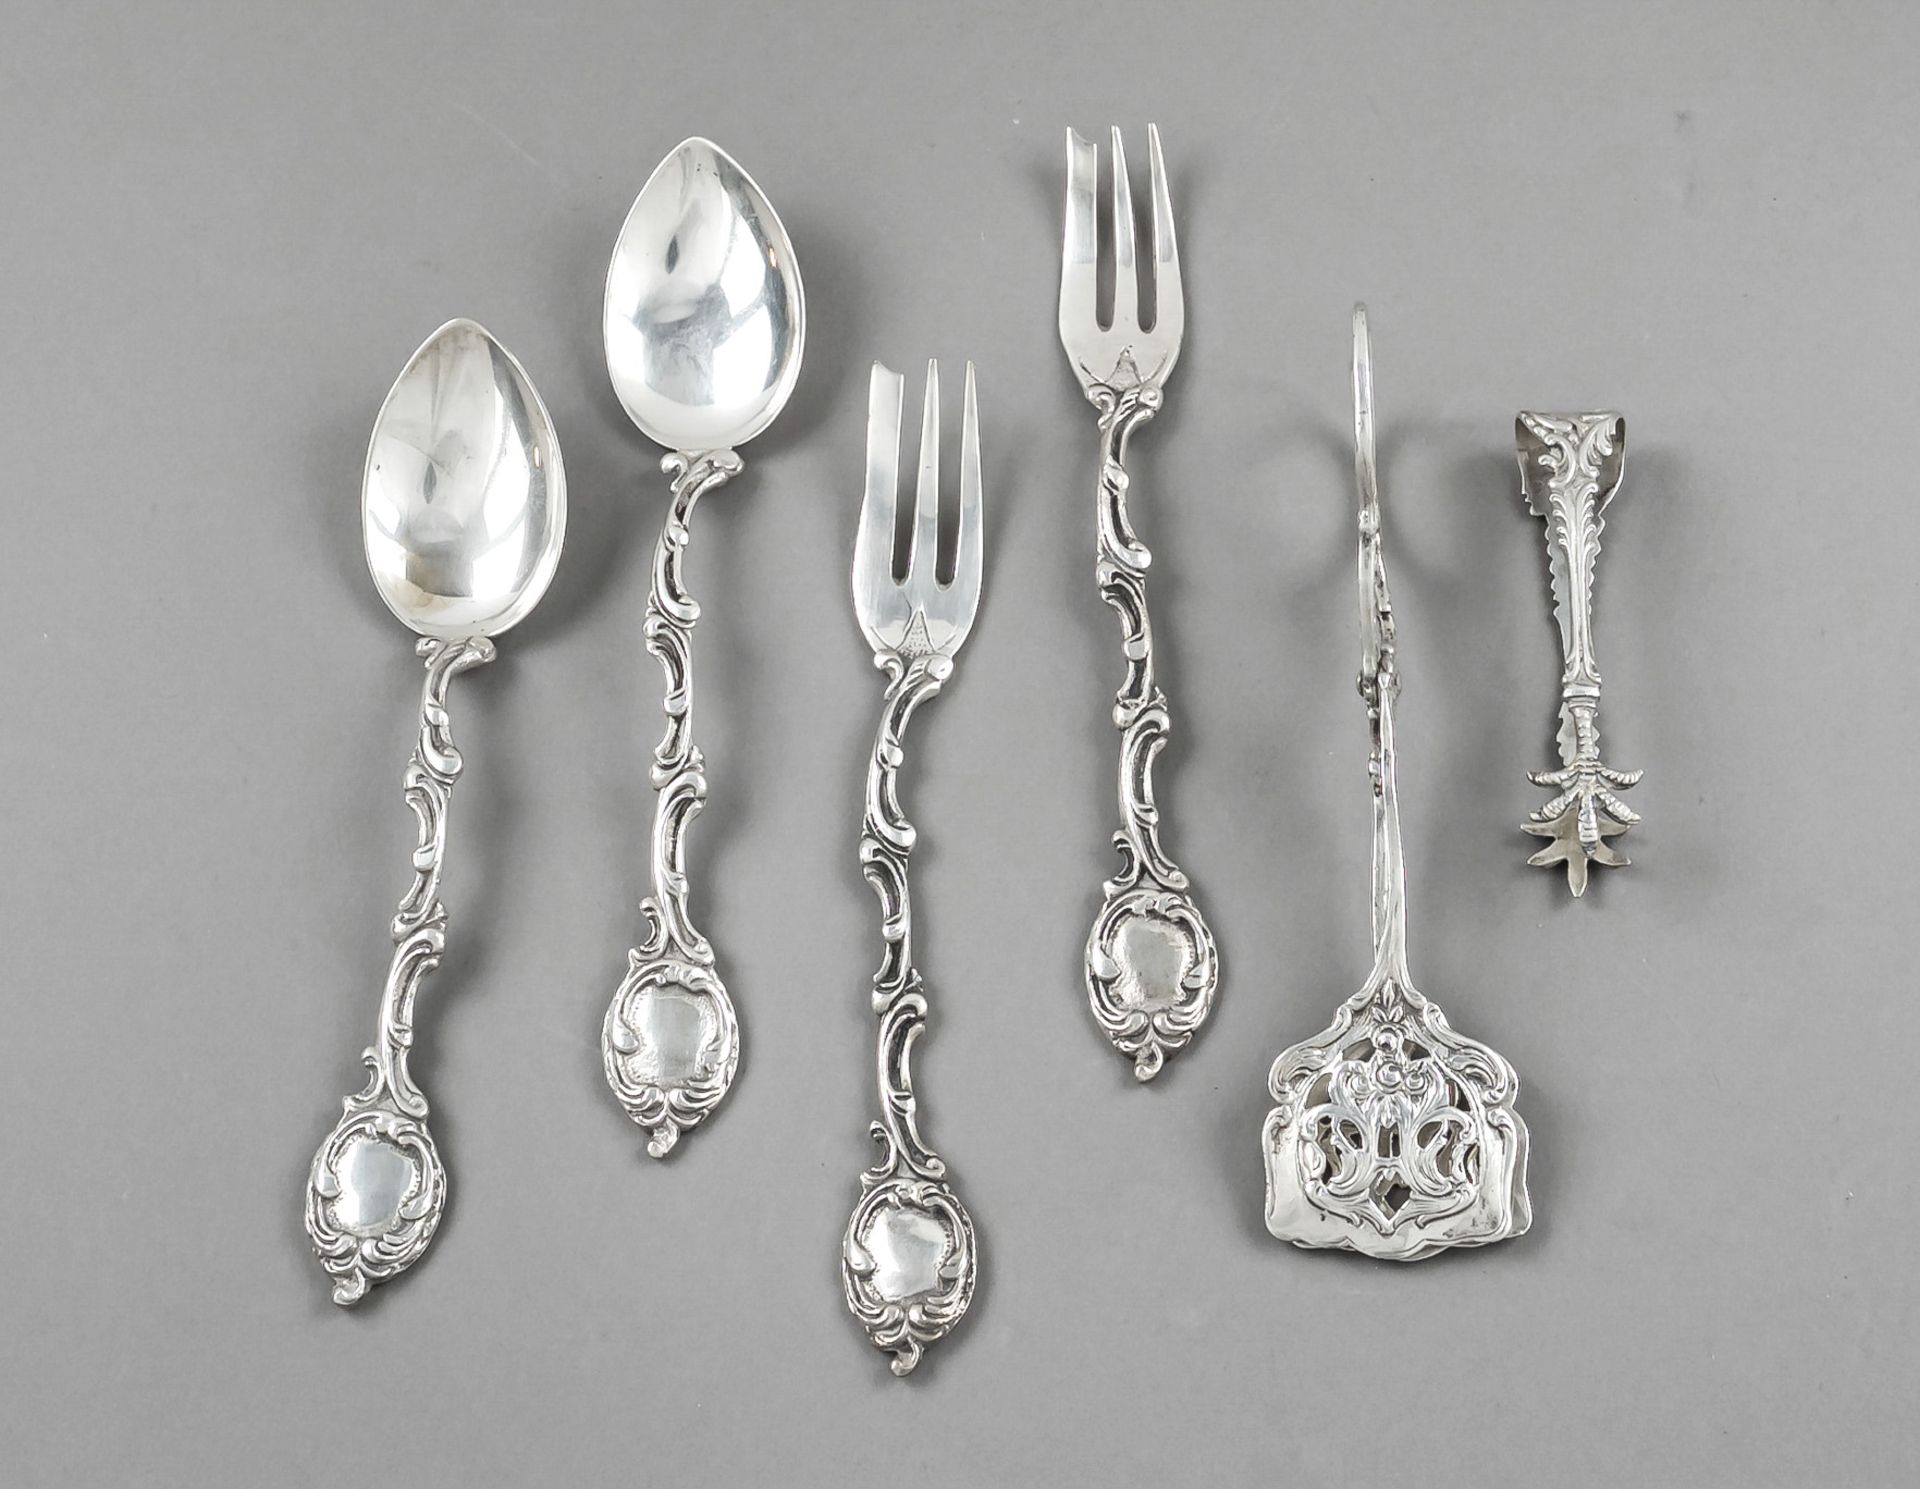 Twelve pieces of cutlery, 20th c., silver 800/000, different decorations, 4 teaspoons, 6 cake forks,